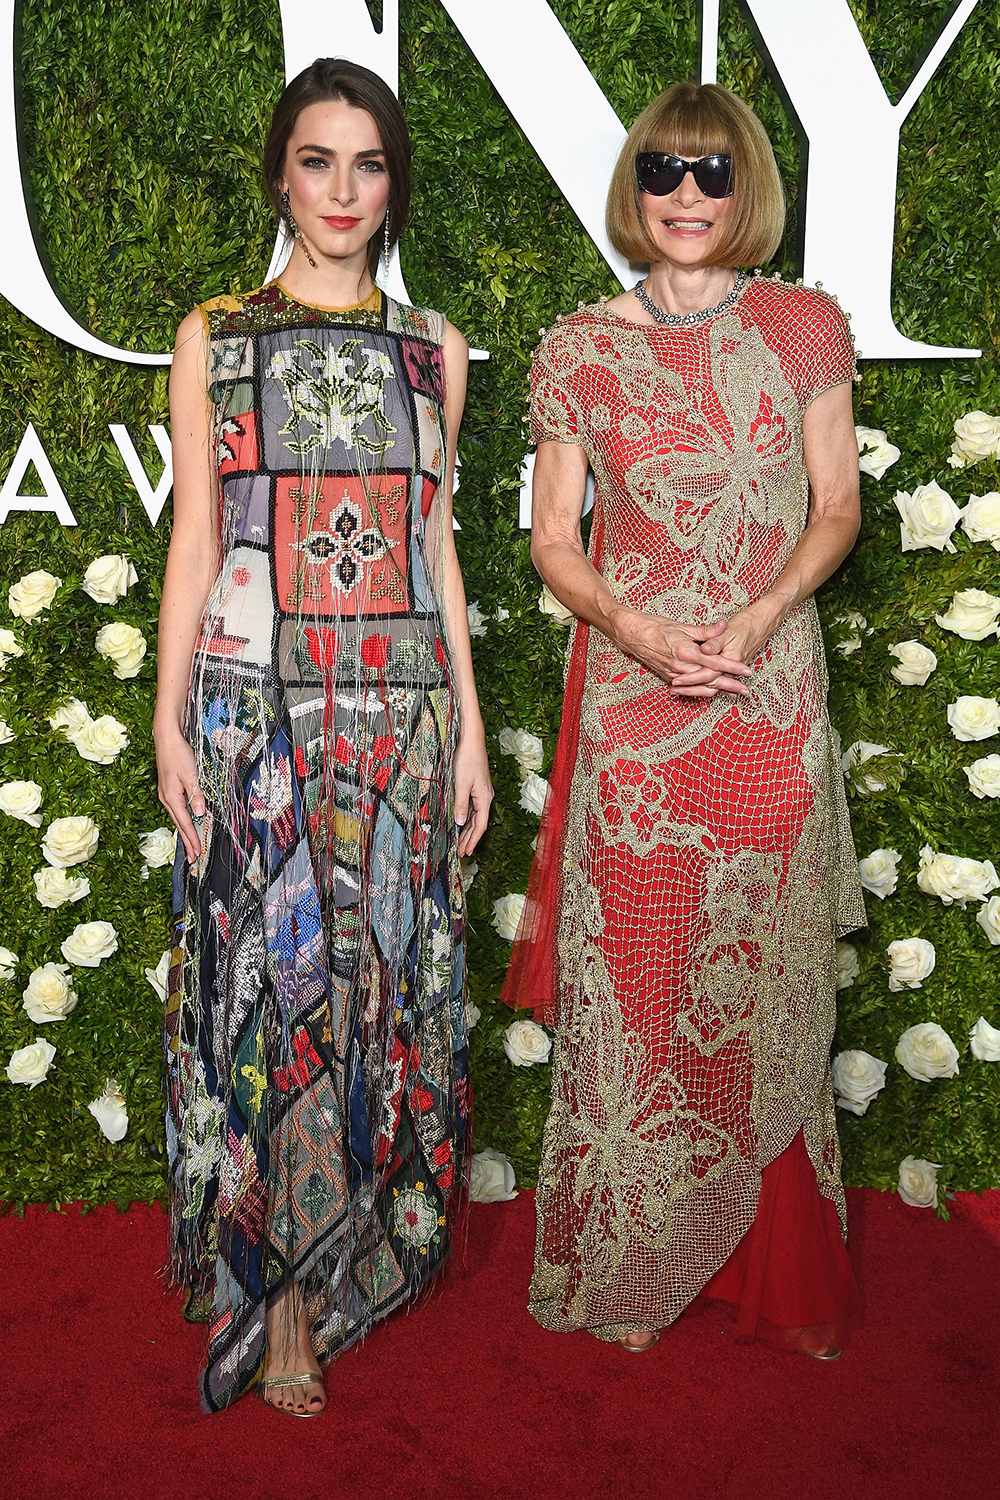 NEW YORK, NY - JUNE 11:  Bee Shaffer (L) and Anna Wintour attend the 2017 Tony Awards at Radio City Music Hall on June 11, 2017 in New York City.  (Photo by Dimitrios Kambouris/Getty Images for Tony Awards Productions)